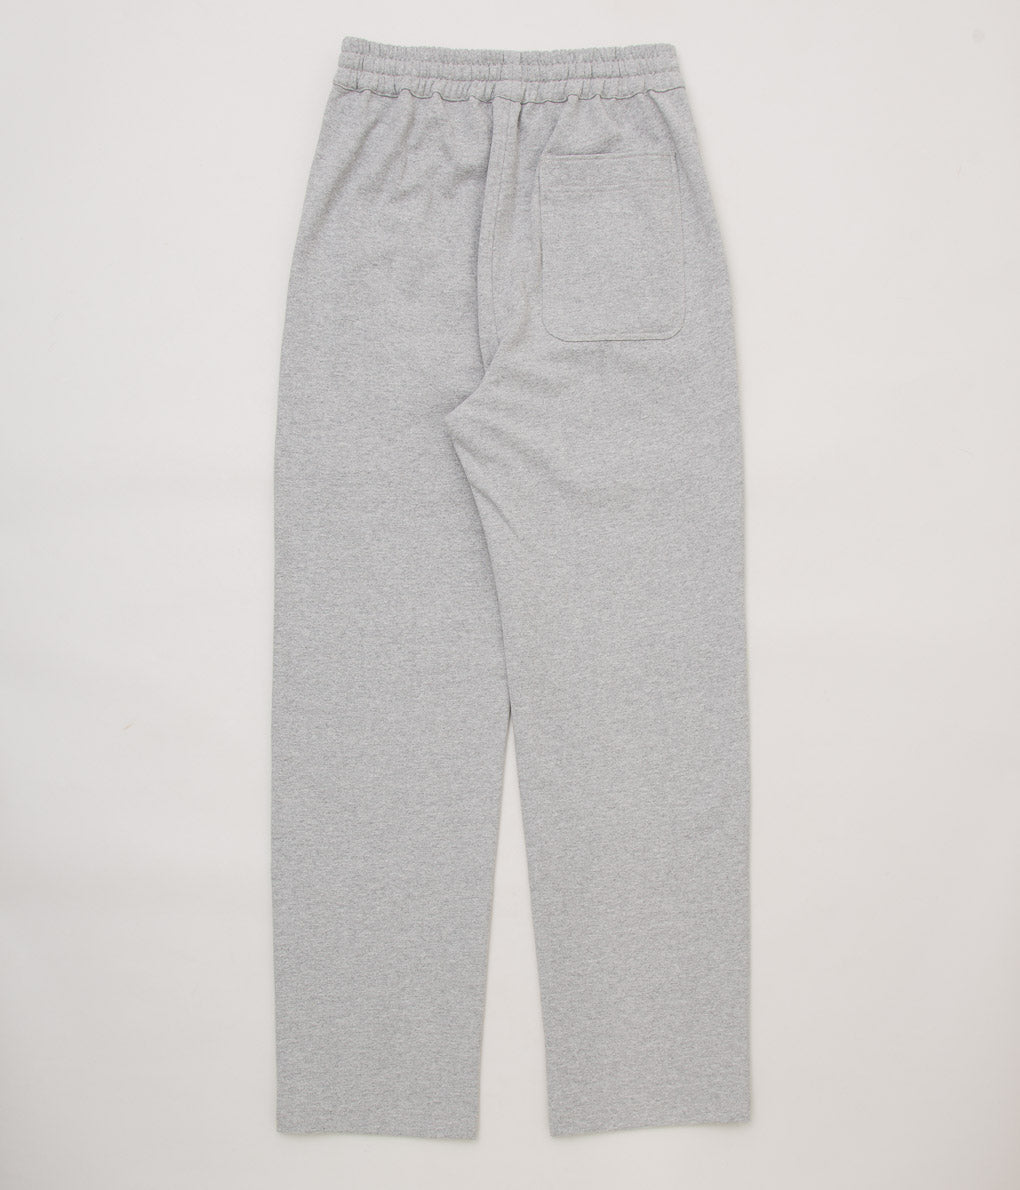 CARTER YOUNG ''PLEATED SWEATPANTS'' (HEATHER GREY)